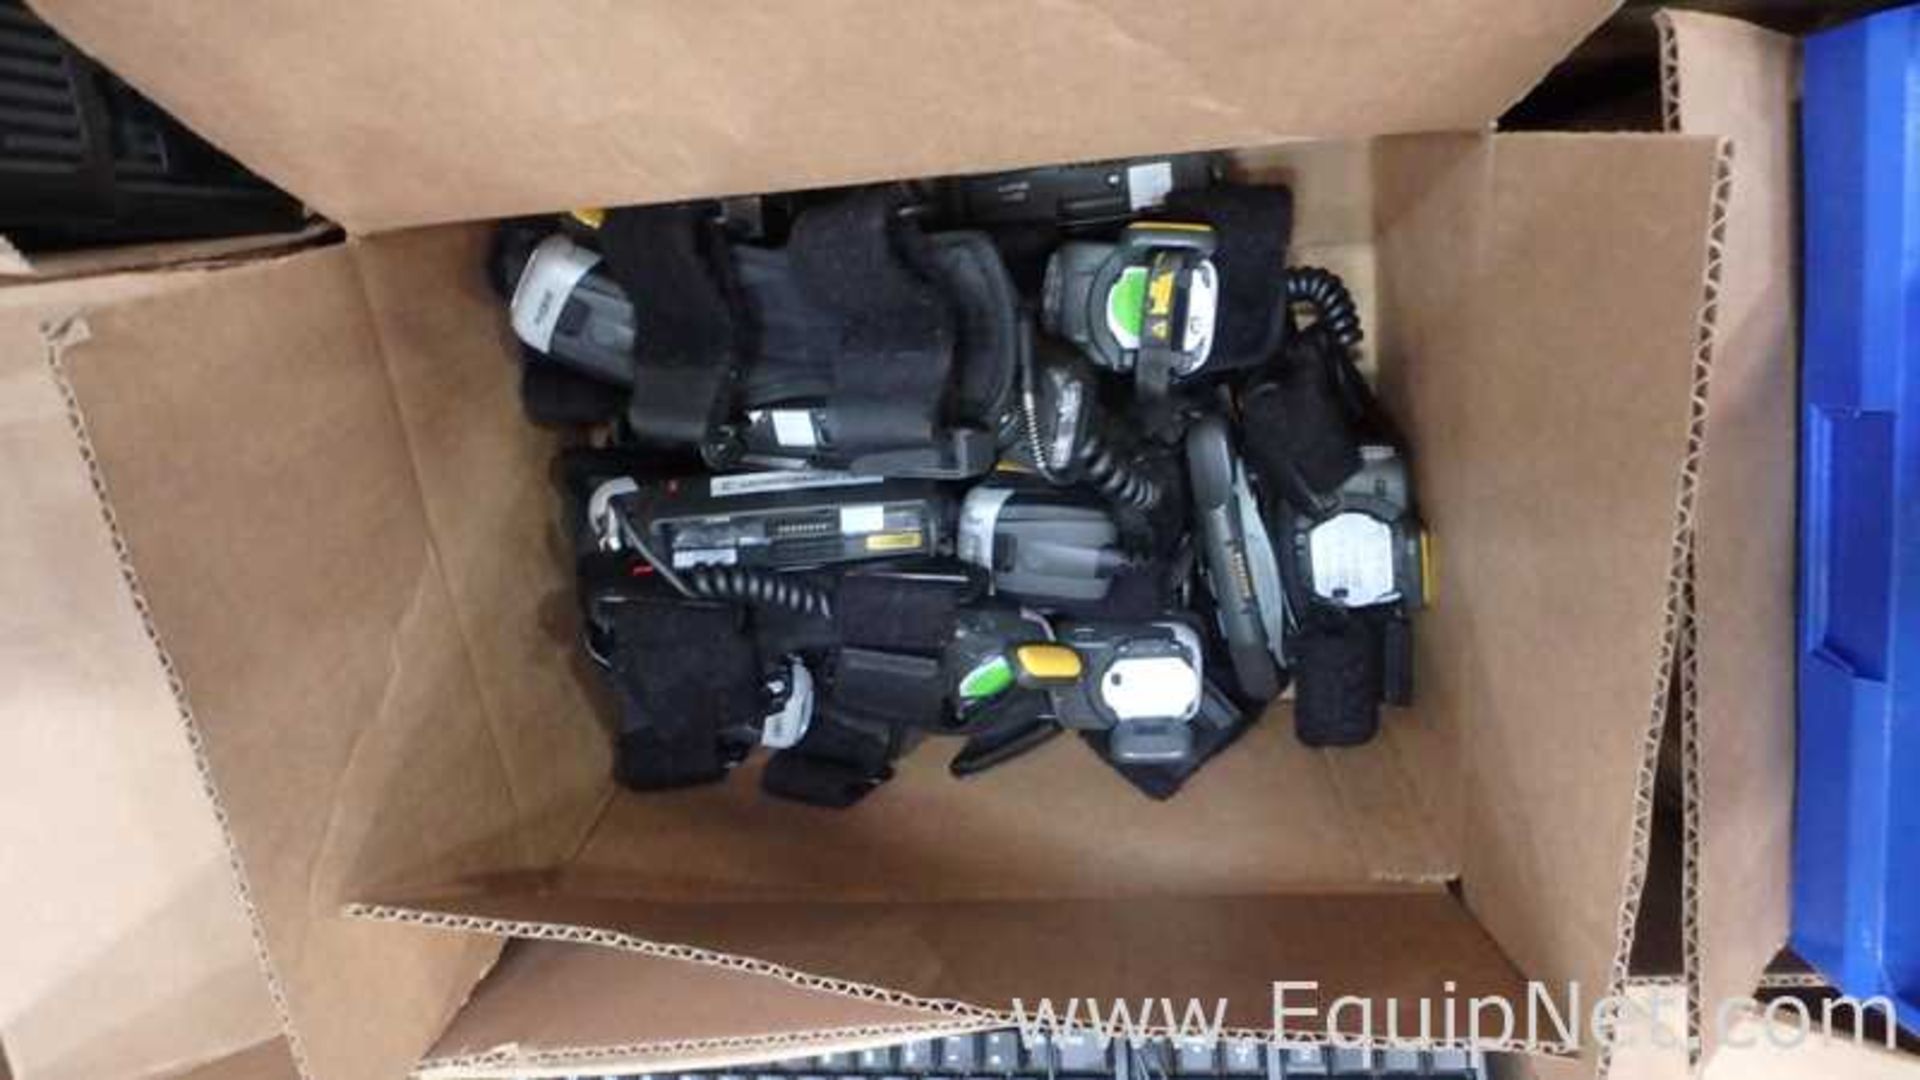 Lot of 1 Pallet Assorted Computer Accessories With Handheld Scanners Charger Station and Phones - Image 6 of 12